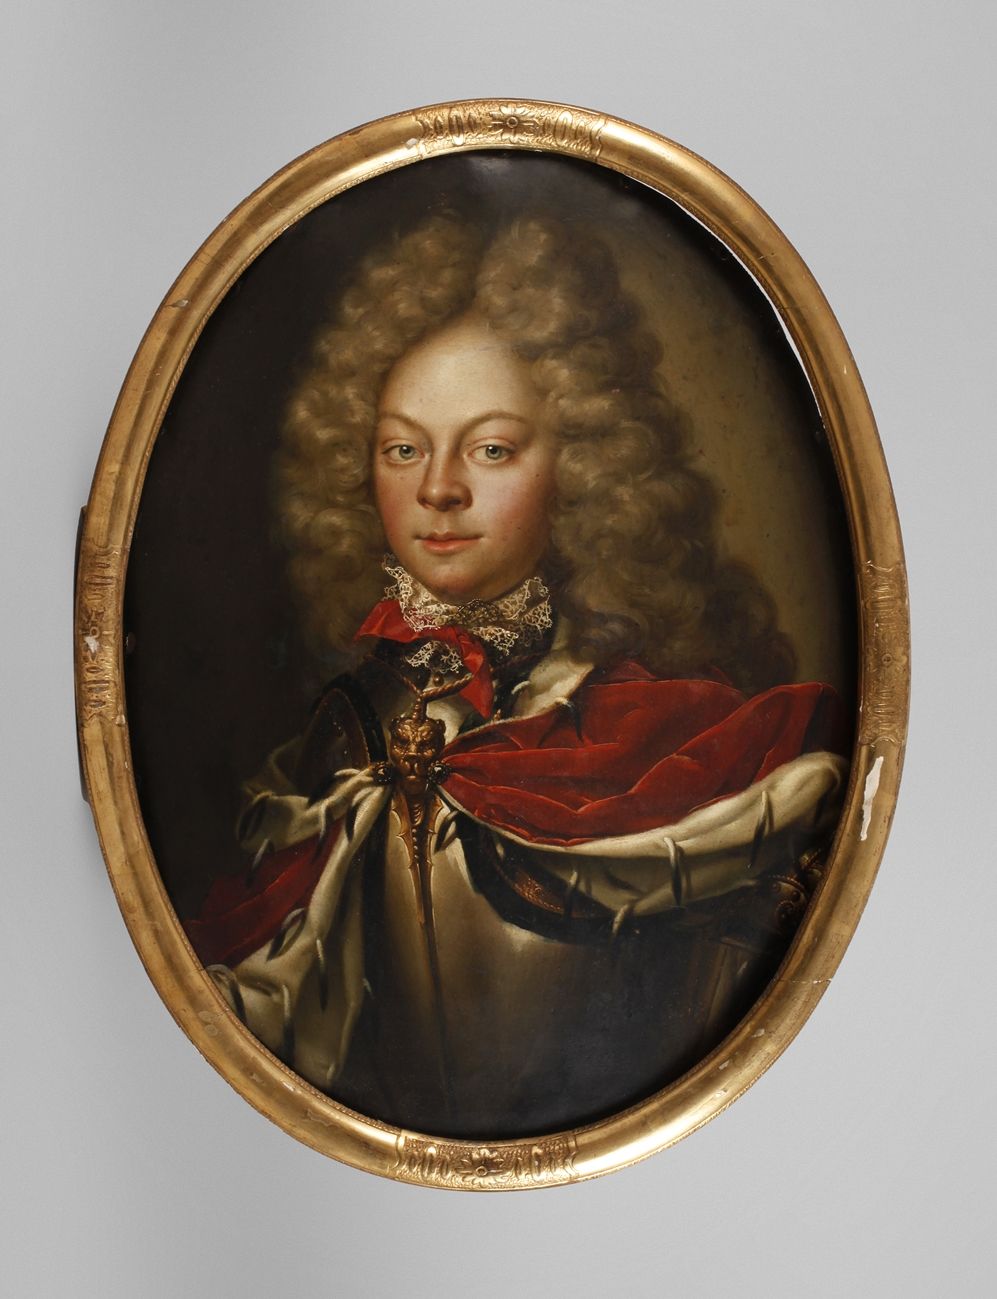 Null Christian Schilbach, Portrait of Frederick III
Chest portrait of a young no&hellip;